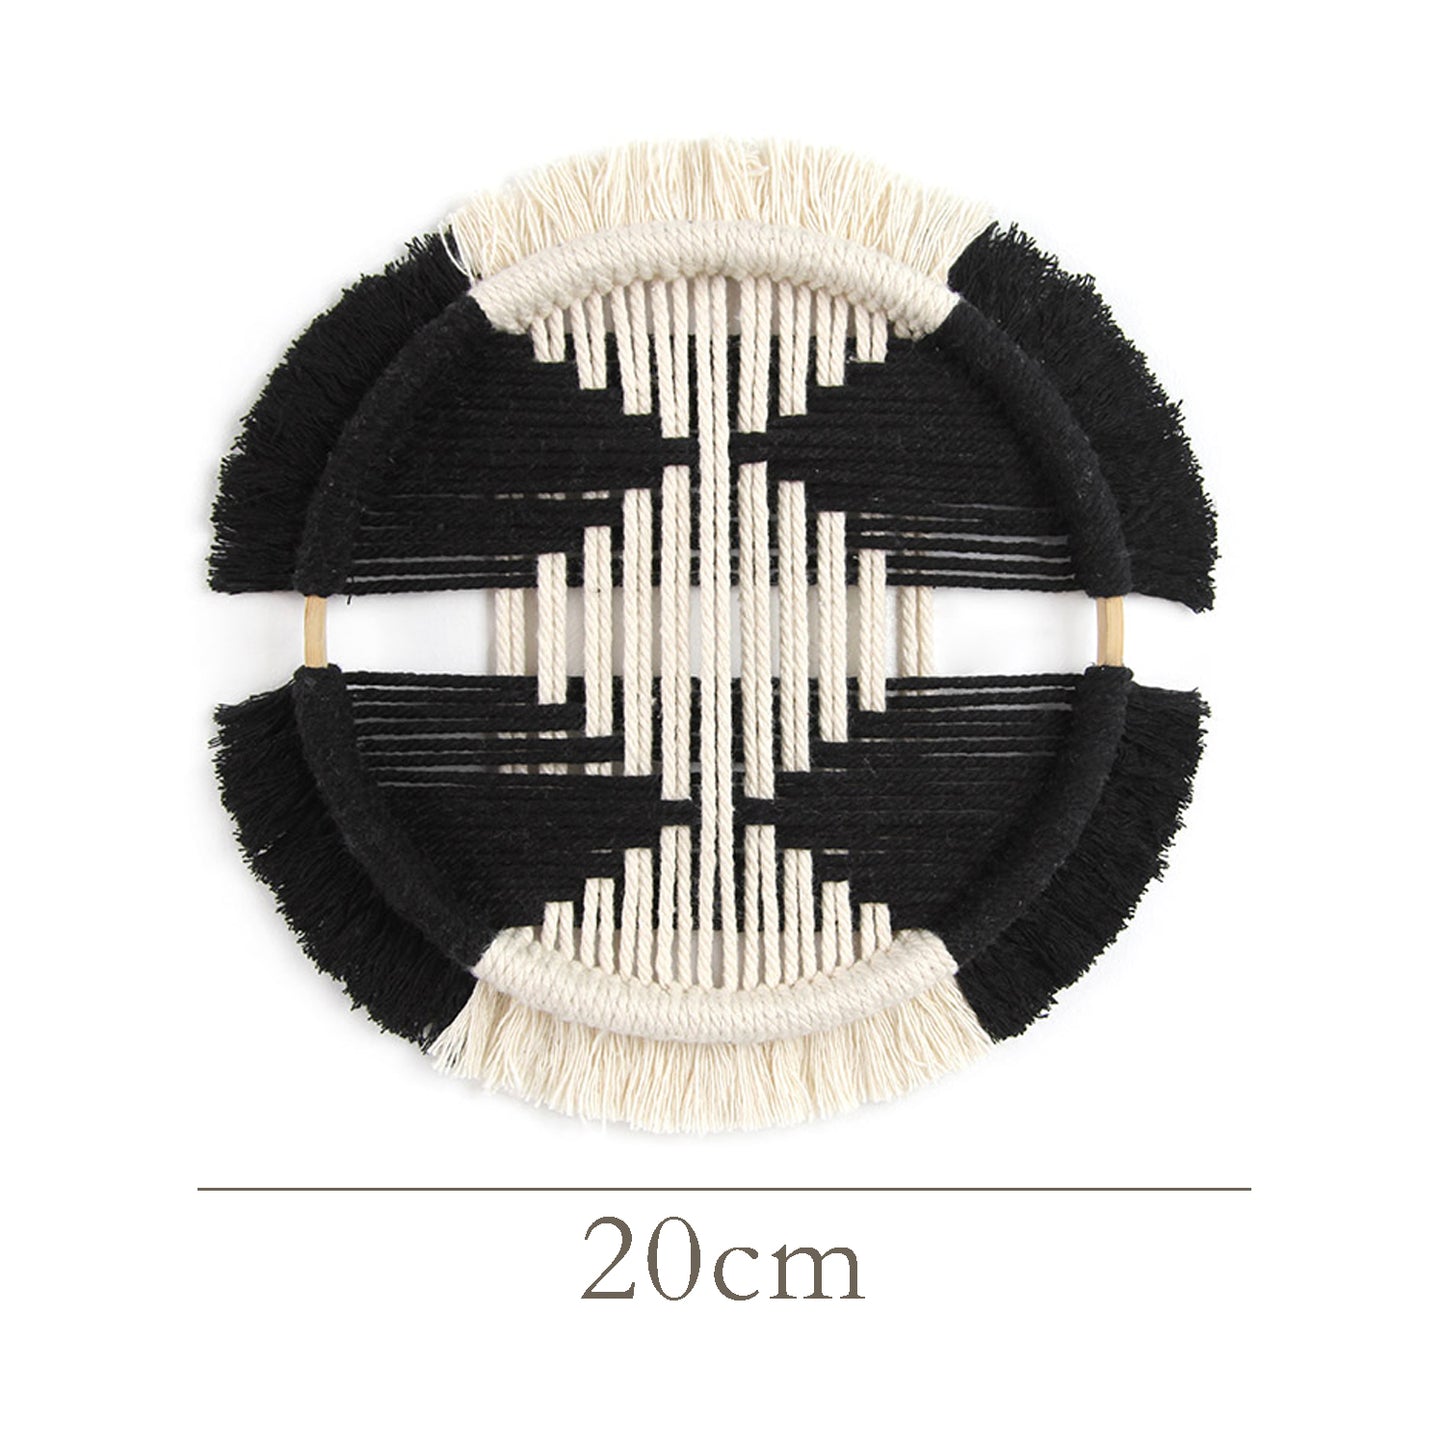 Black Cotton Woven Round Wall Hanging Decor